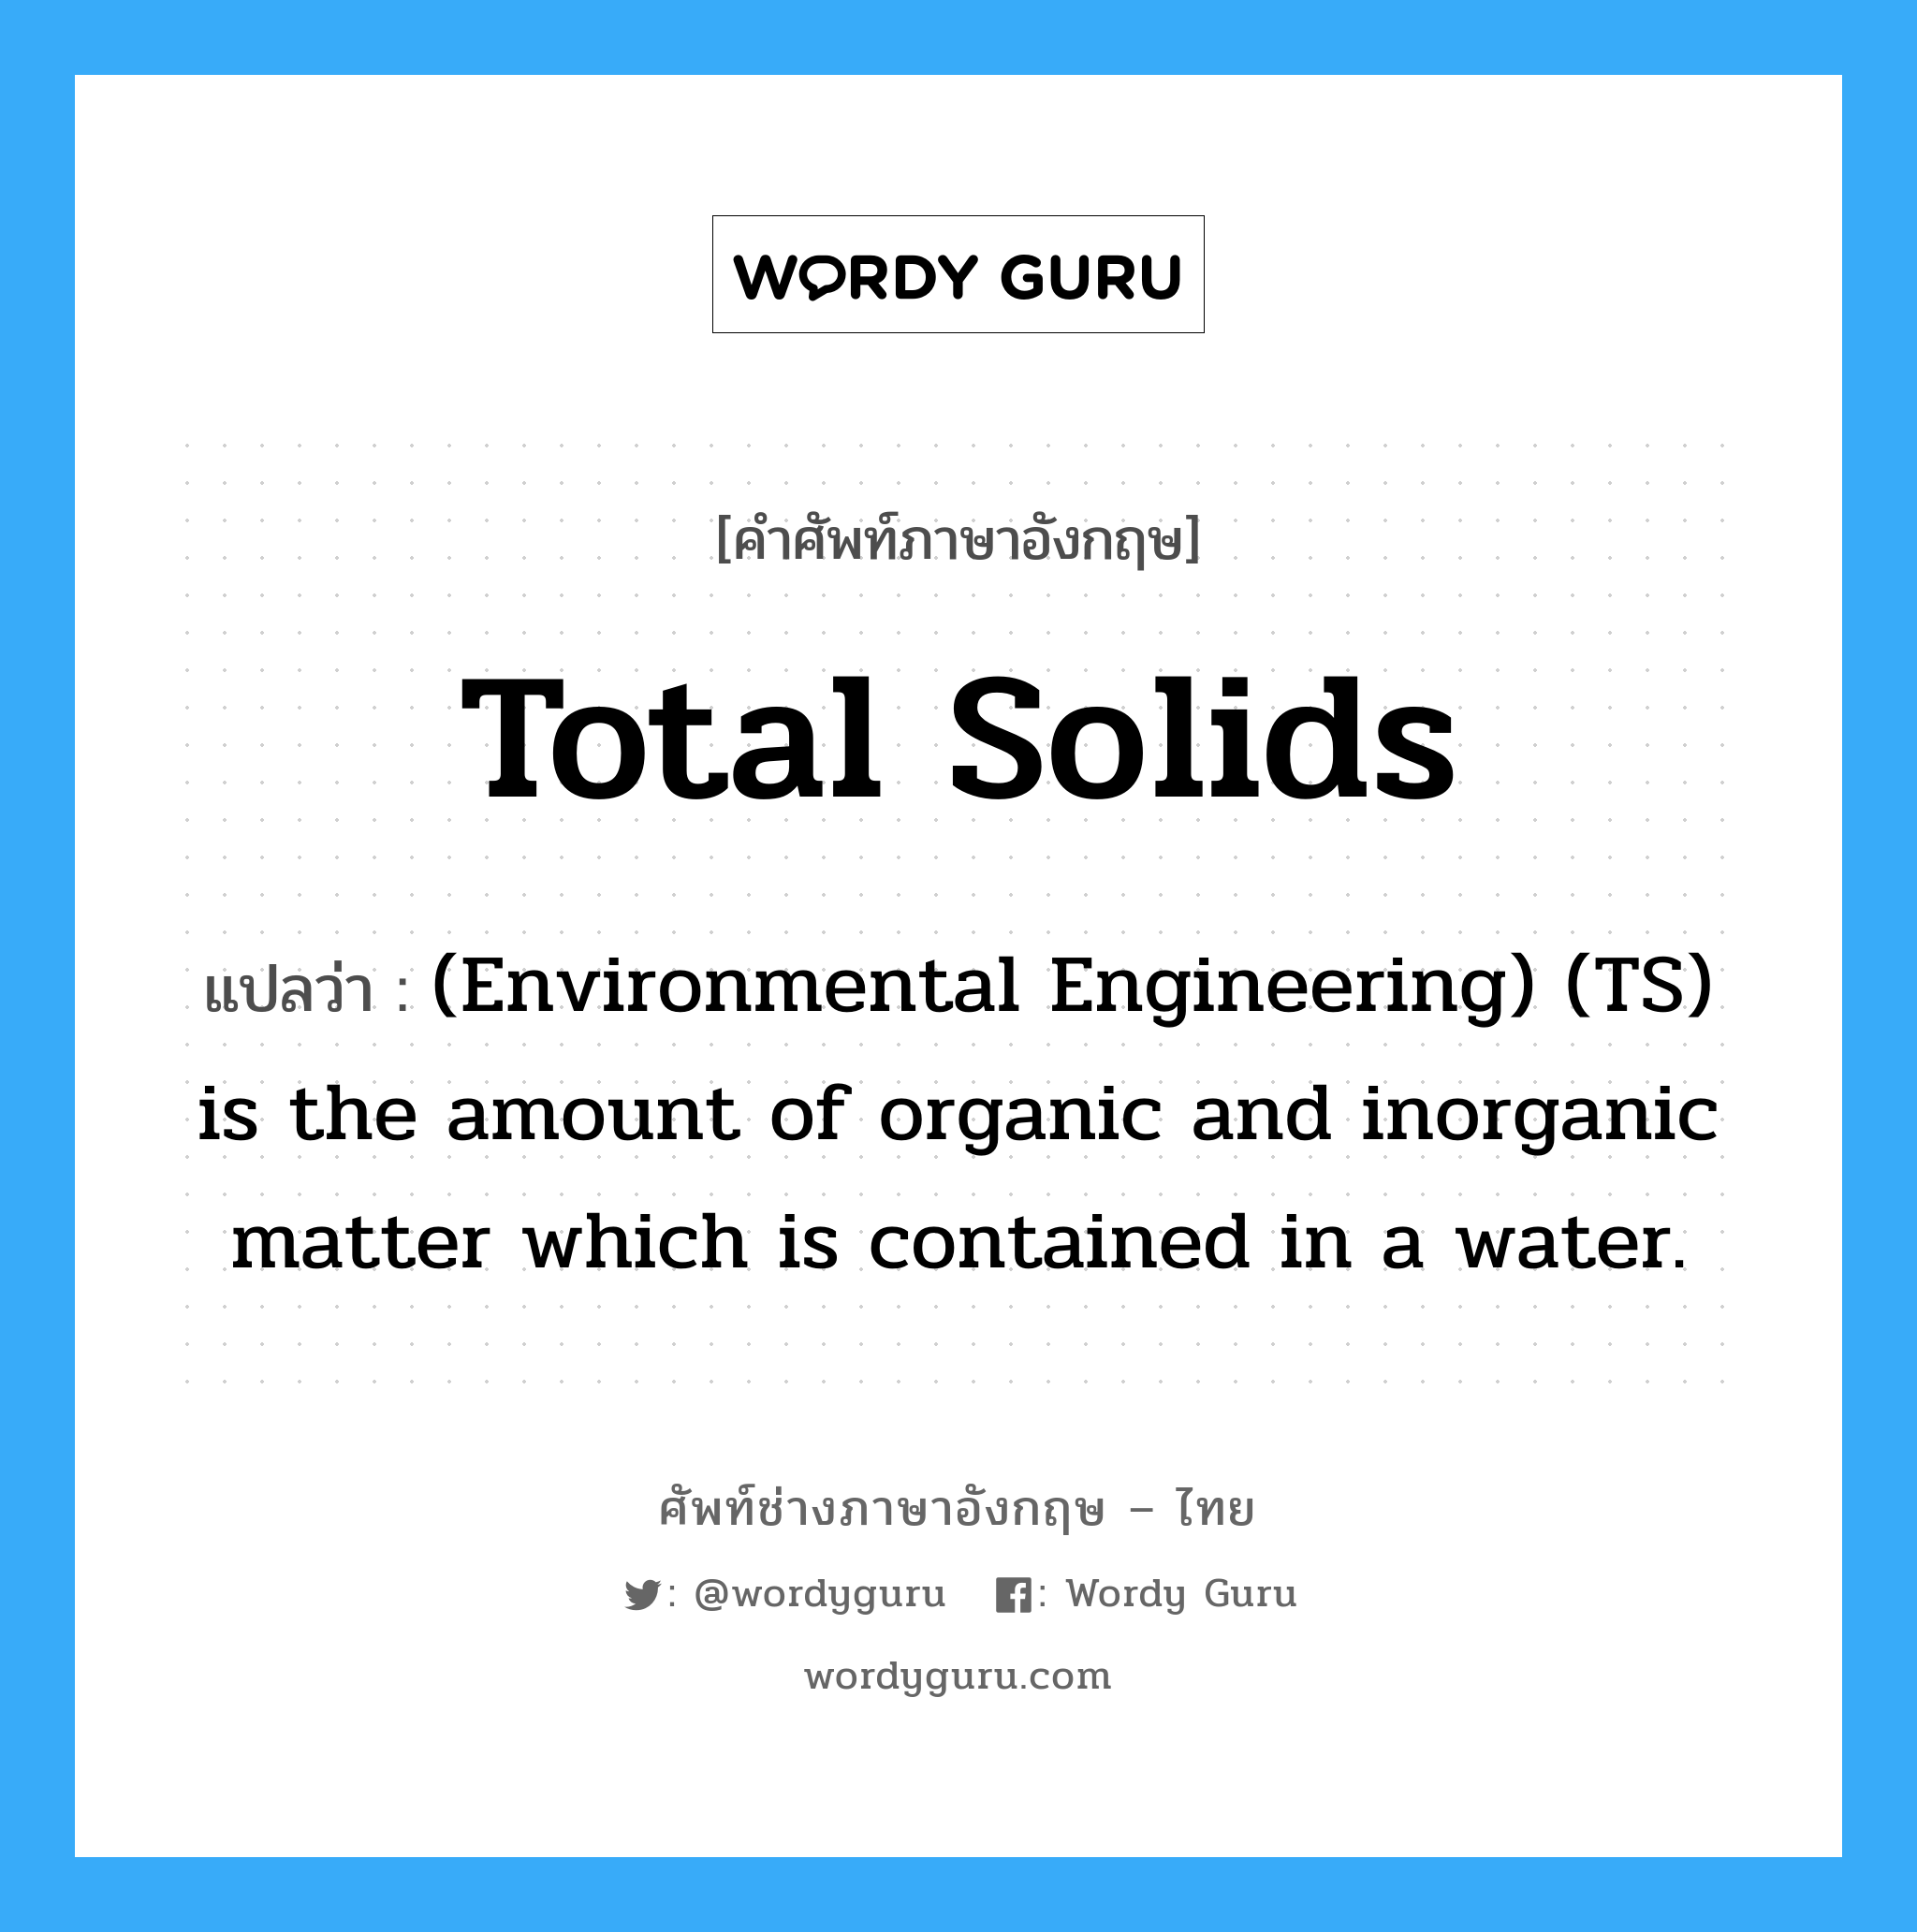 Total solids แปลว่า?, คำศัพท์ช่างภาษาอังกฤษ - ไทย Total solids คำศัพท์ภาษาอังกฤษ Total solids แปลว่า (Environmental Engineering) (TS) is the amount of organic and inorganic matter which is contained in a water.